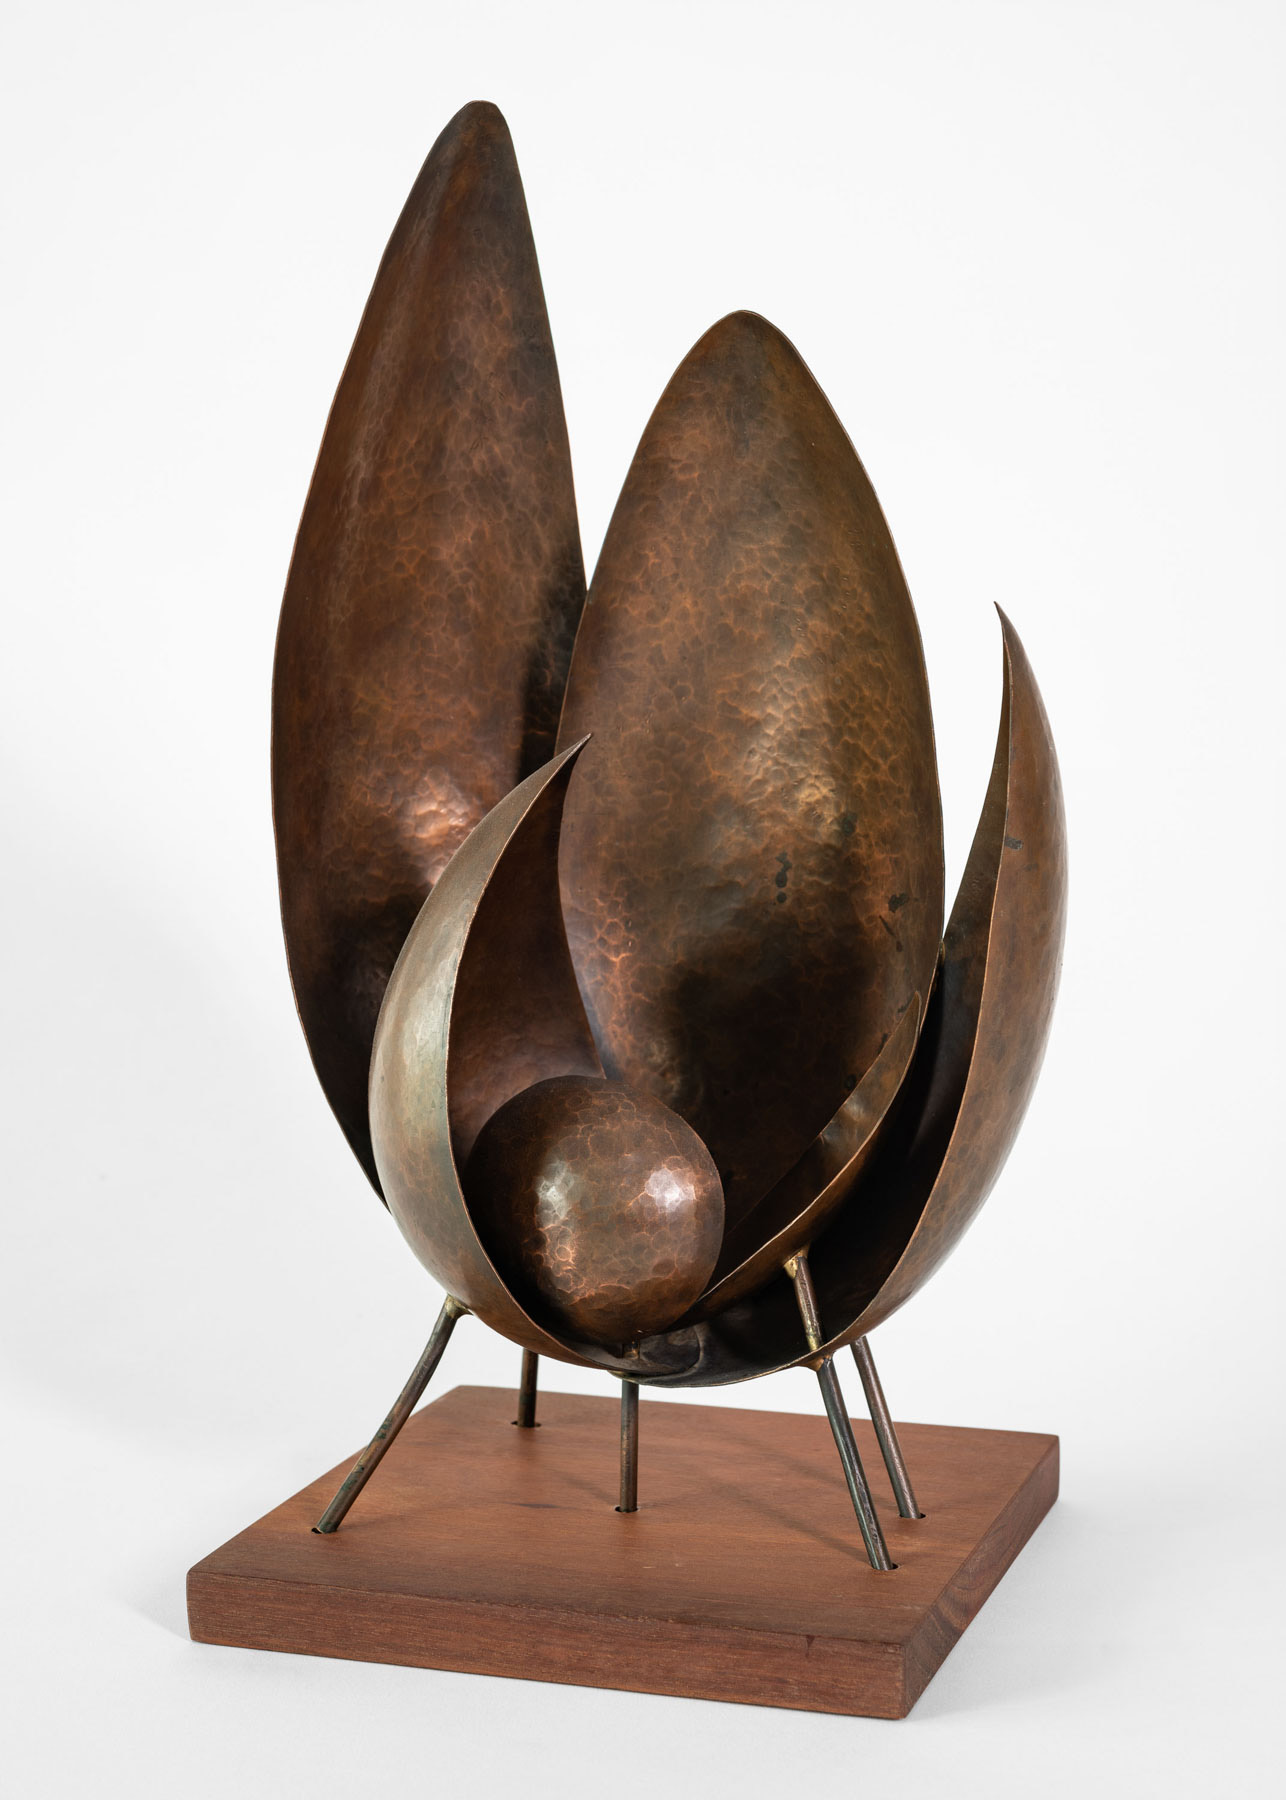 A bronze sculpture with leaf-like shapes reaching upward and a sphere cradled at the bottom of the flat, broad leaves.